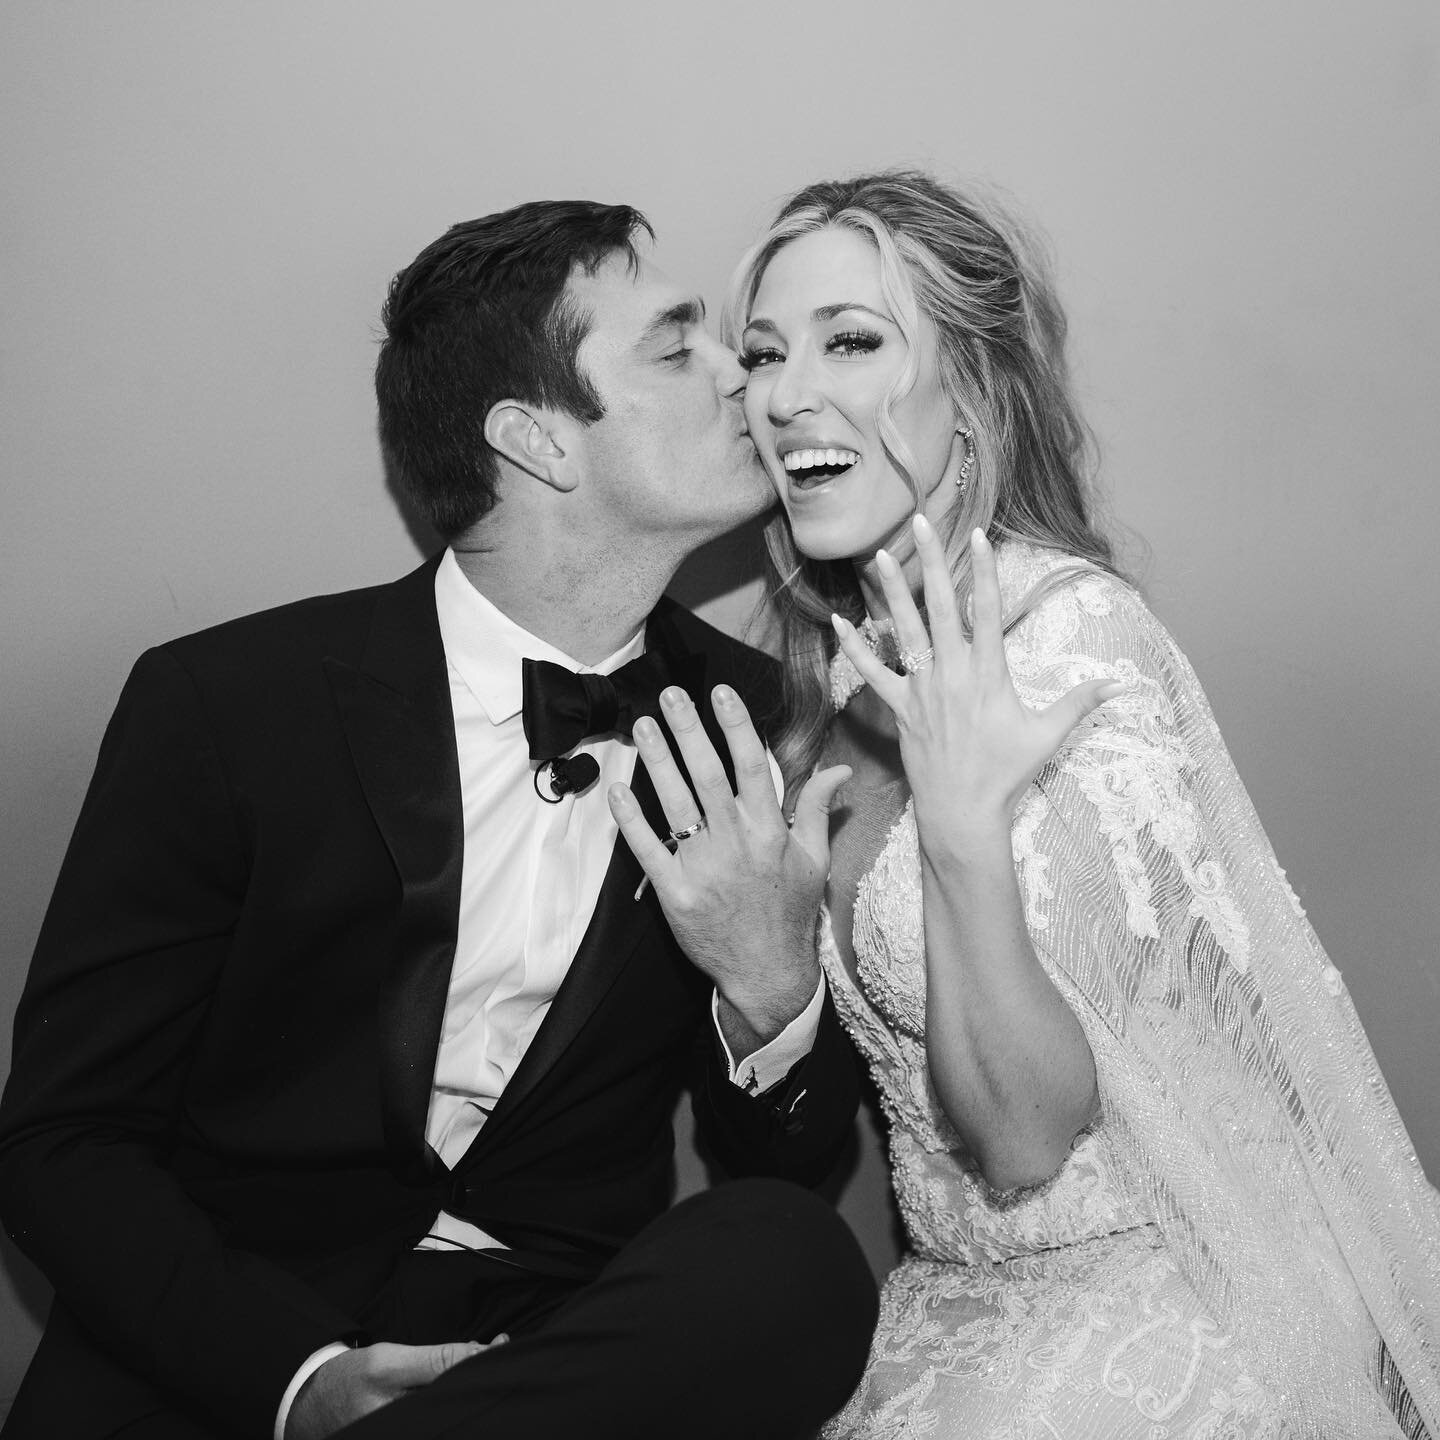 That &ldquo;Just Married&rdquo; Feeling.
.
Grab a copy of @nashvillelifestyles summer wedding edition for a look into this incredibly fun @cmhofofficial wedding with Terah and Madison.